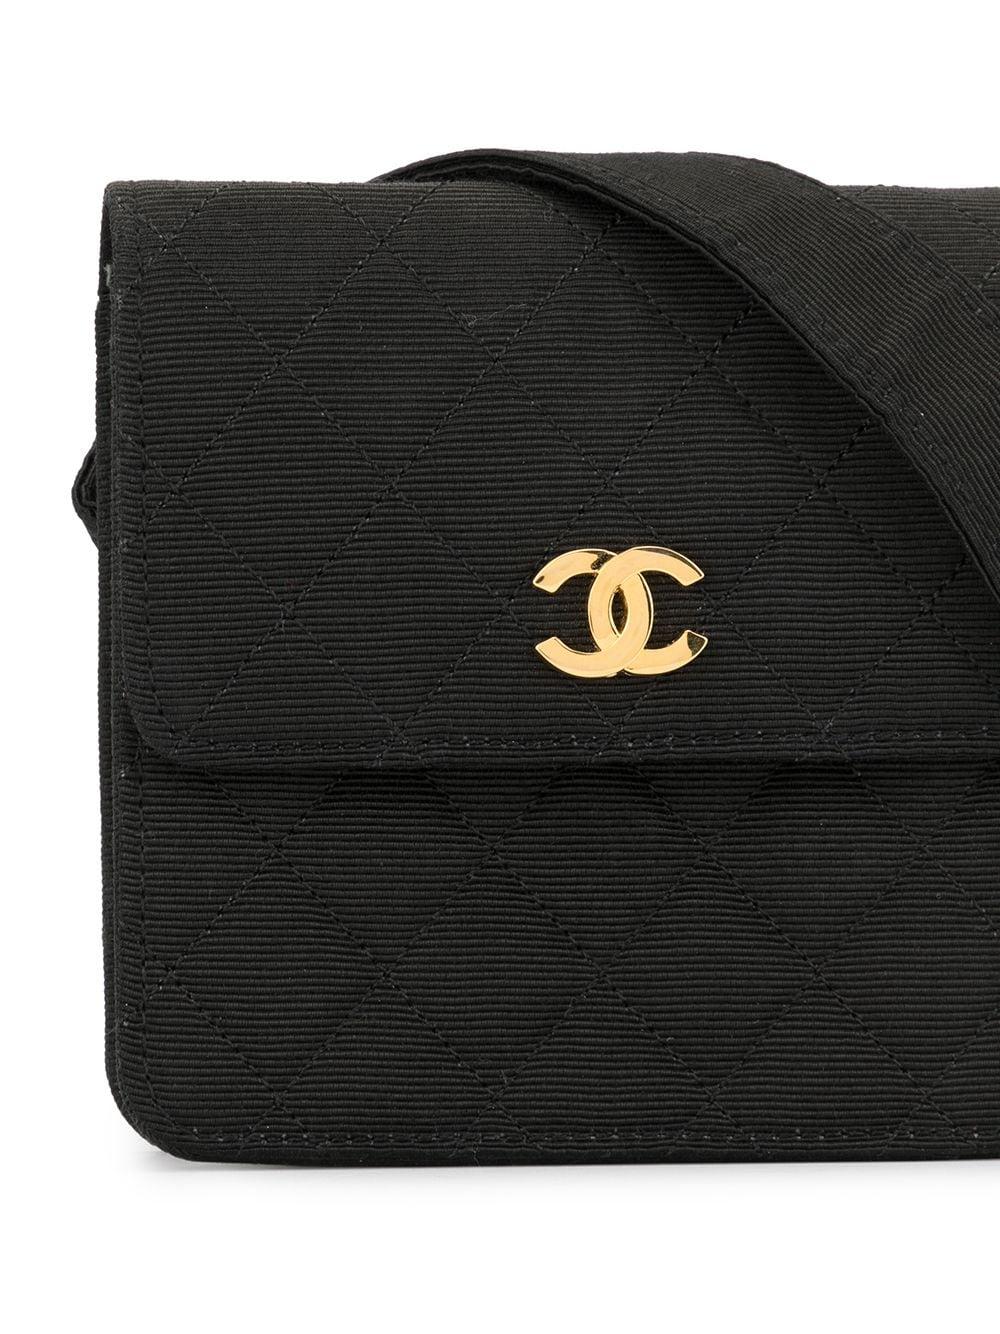 Chanel 1990 Vintage Diamond Quilted Belt Waist Mini Classic Flap Bag In Good Condition For Sale In Miami, FL